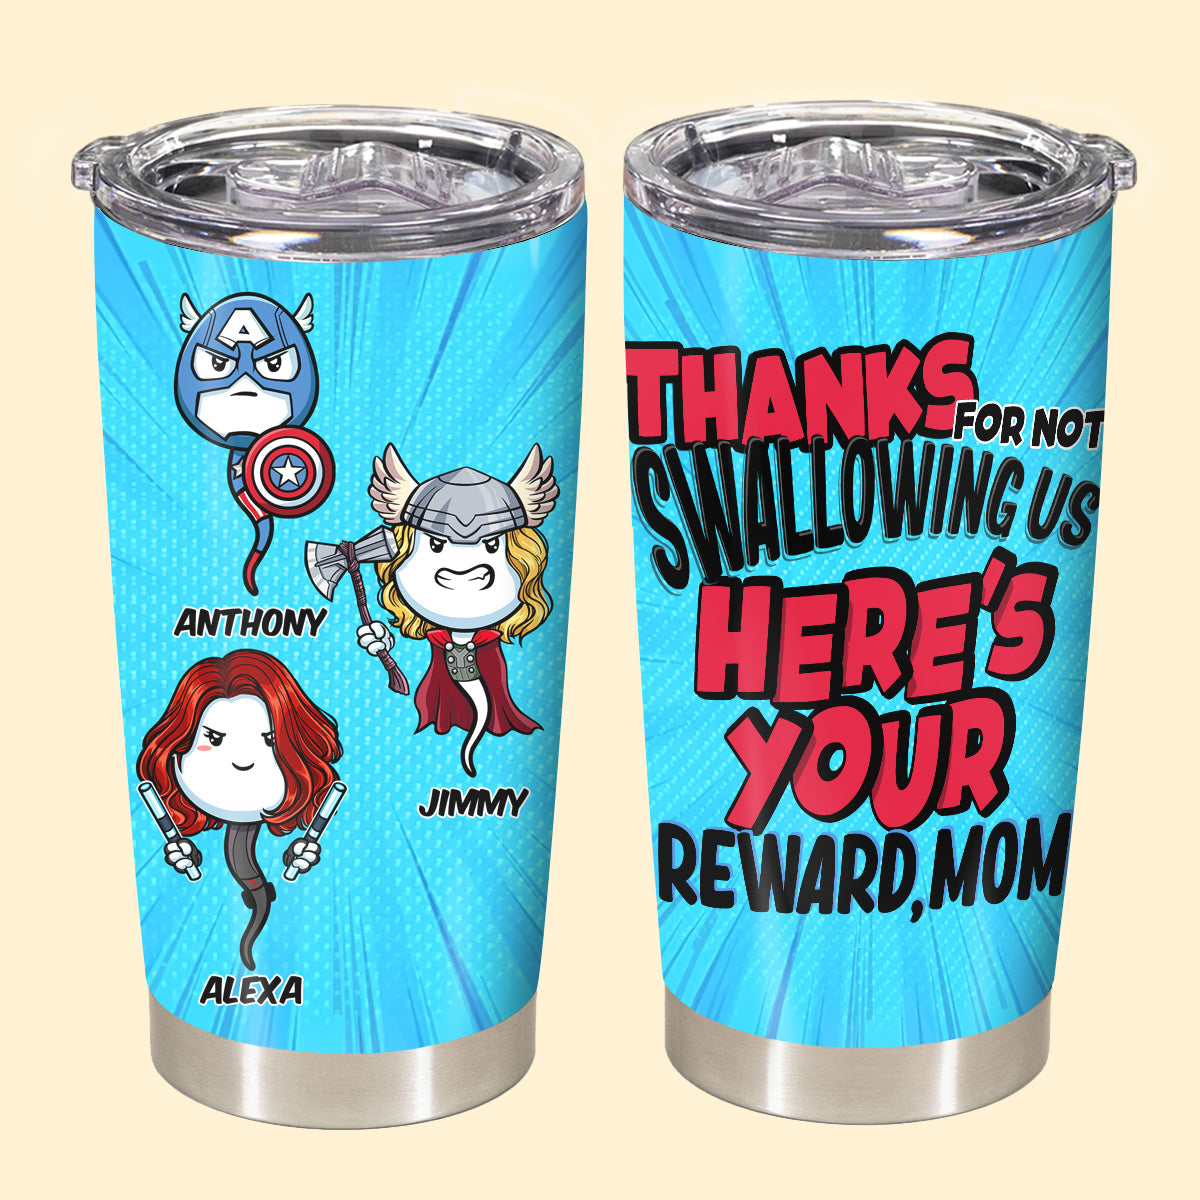 Multiverse Thanks For Not Swallowing Us - Personalized Tumbler - Mother's Day, Funny, Birthday Gift For Mom, Mother, Wife 2_4fb01341-af32-4171-abaa-aea977e8453d.jpg?v=1683211048